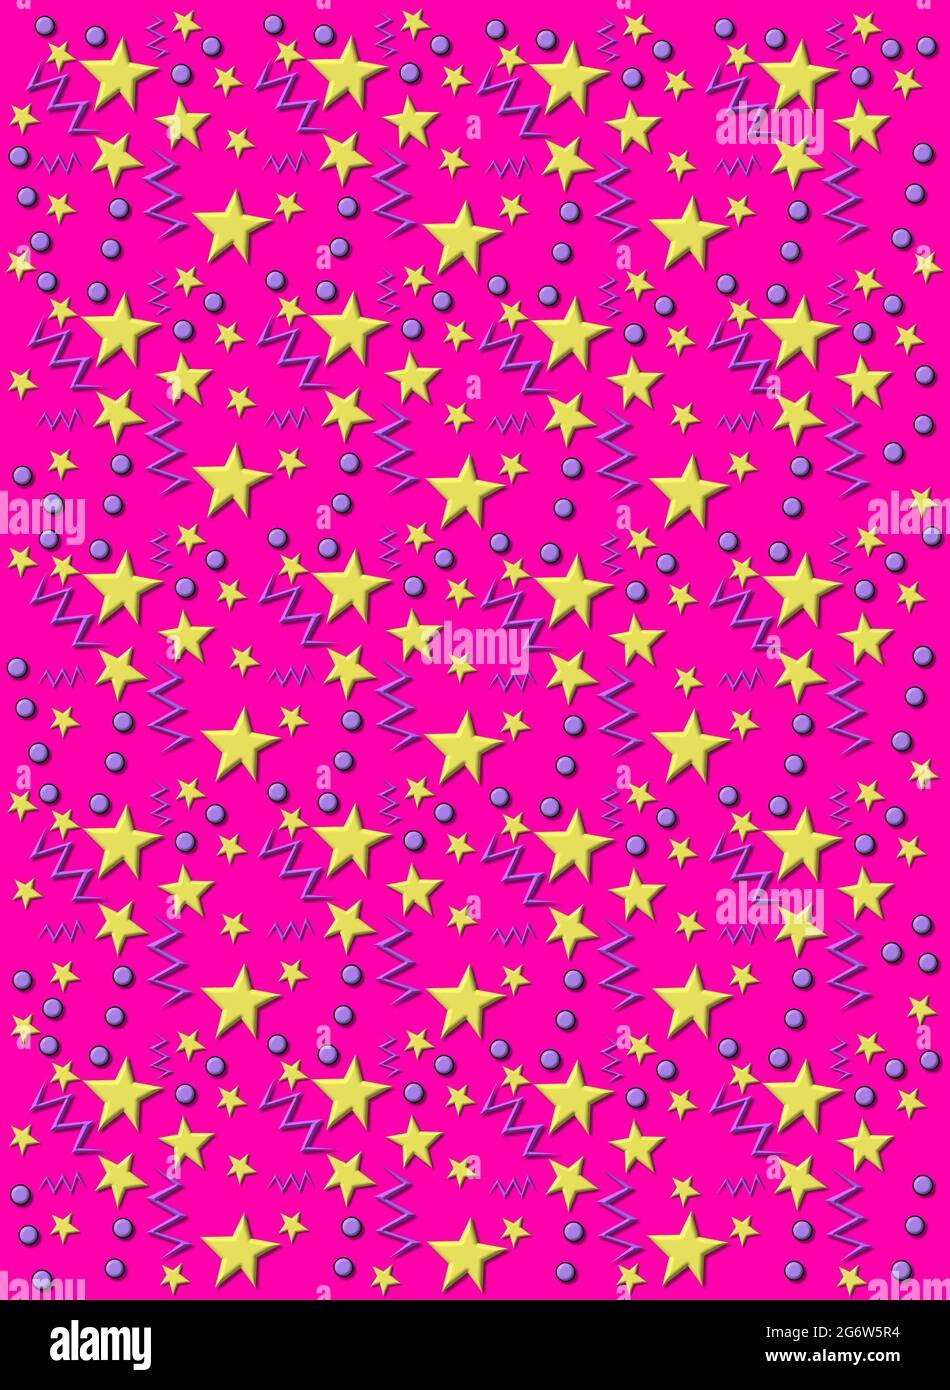 Bright pink background is covered in yellow stars, purple lightning bolts  and purple circles Stock Photo - Alamy